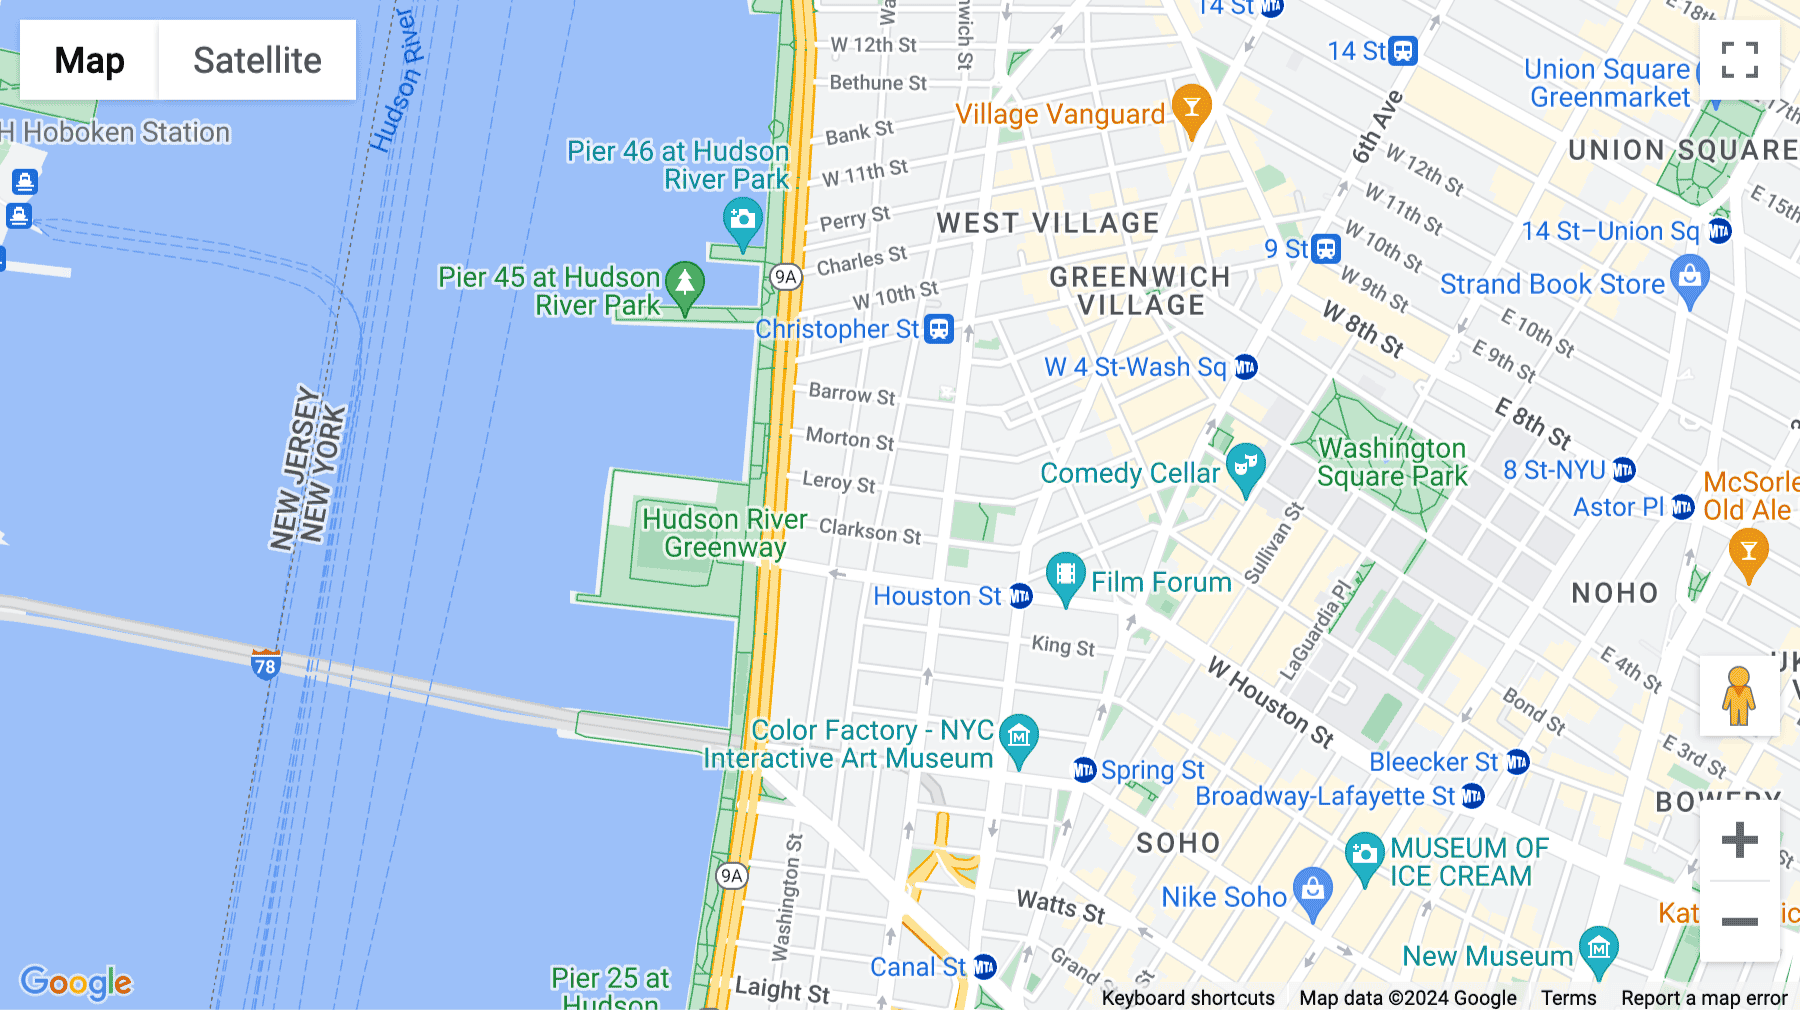 Click for interative map of 609 Greenwich Street, New York City